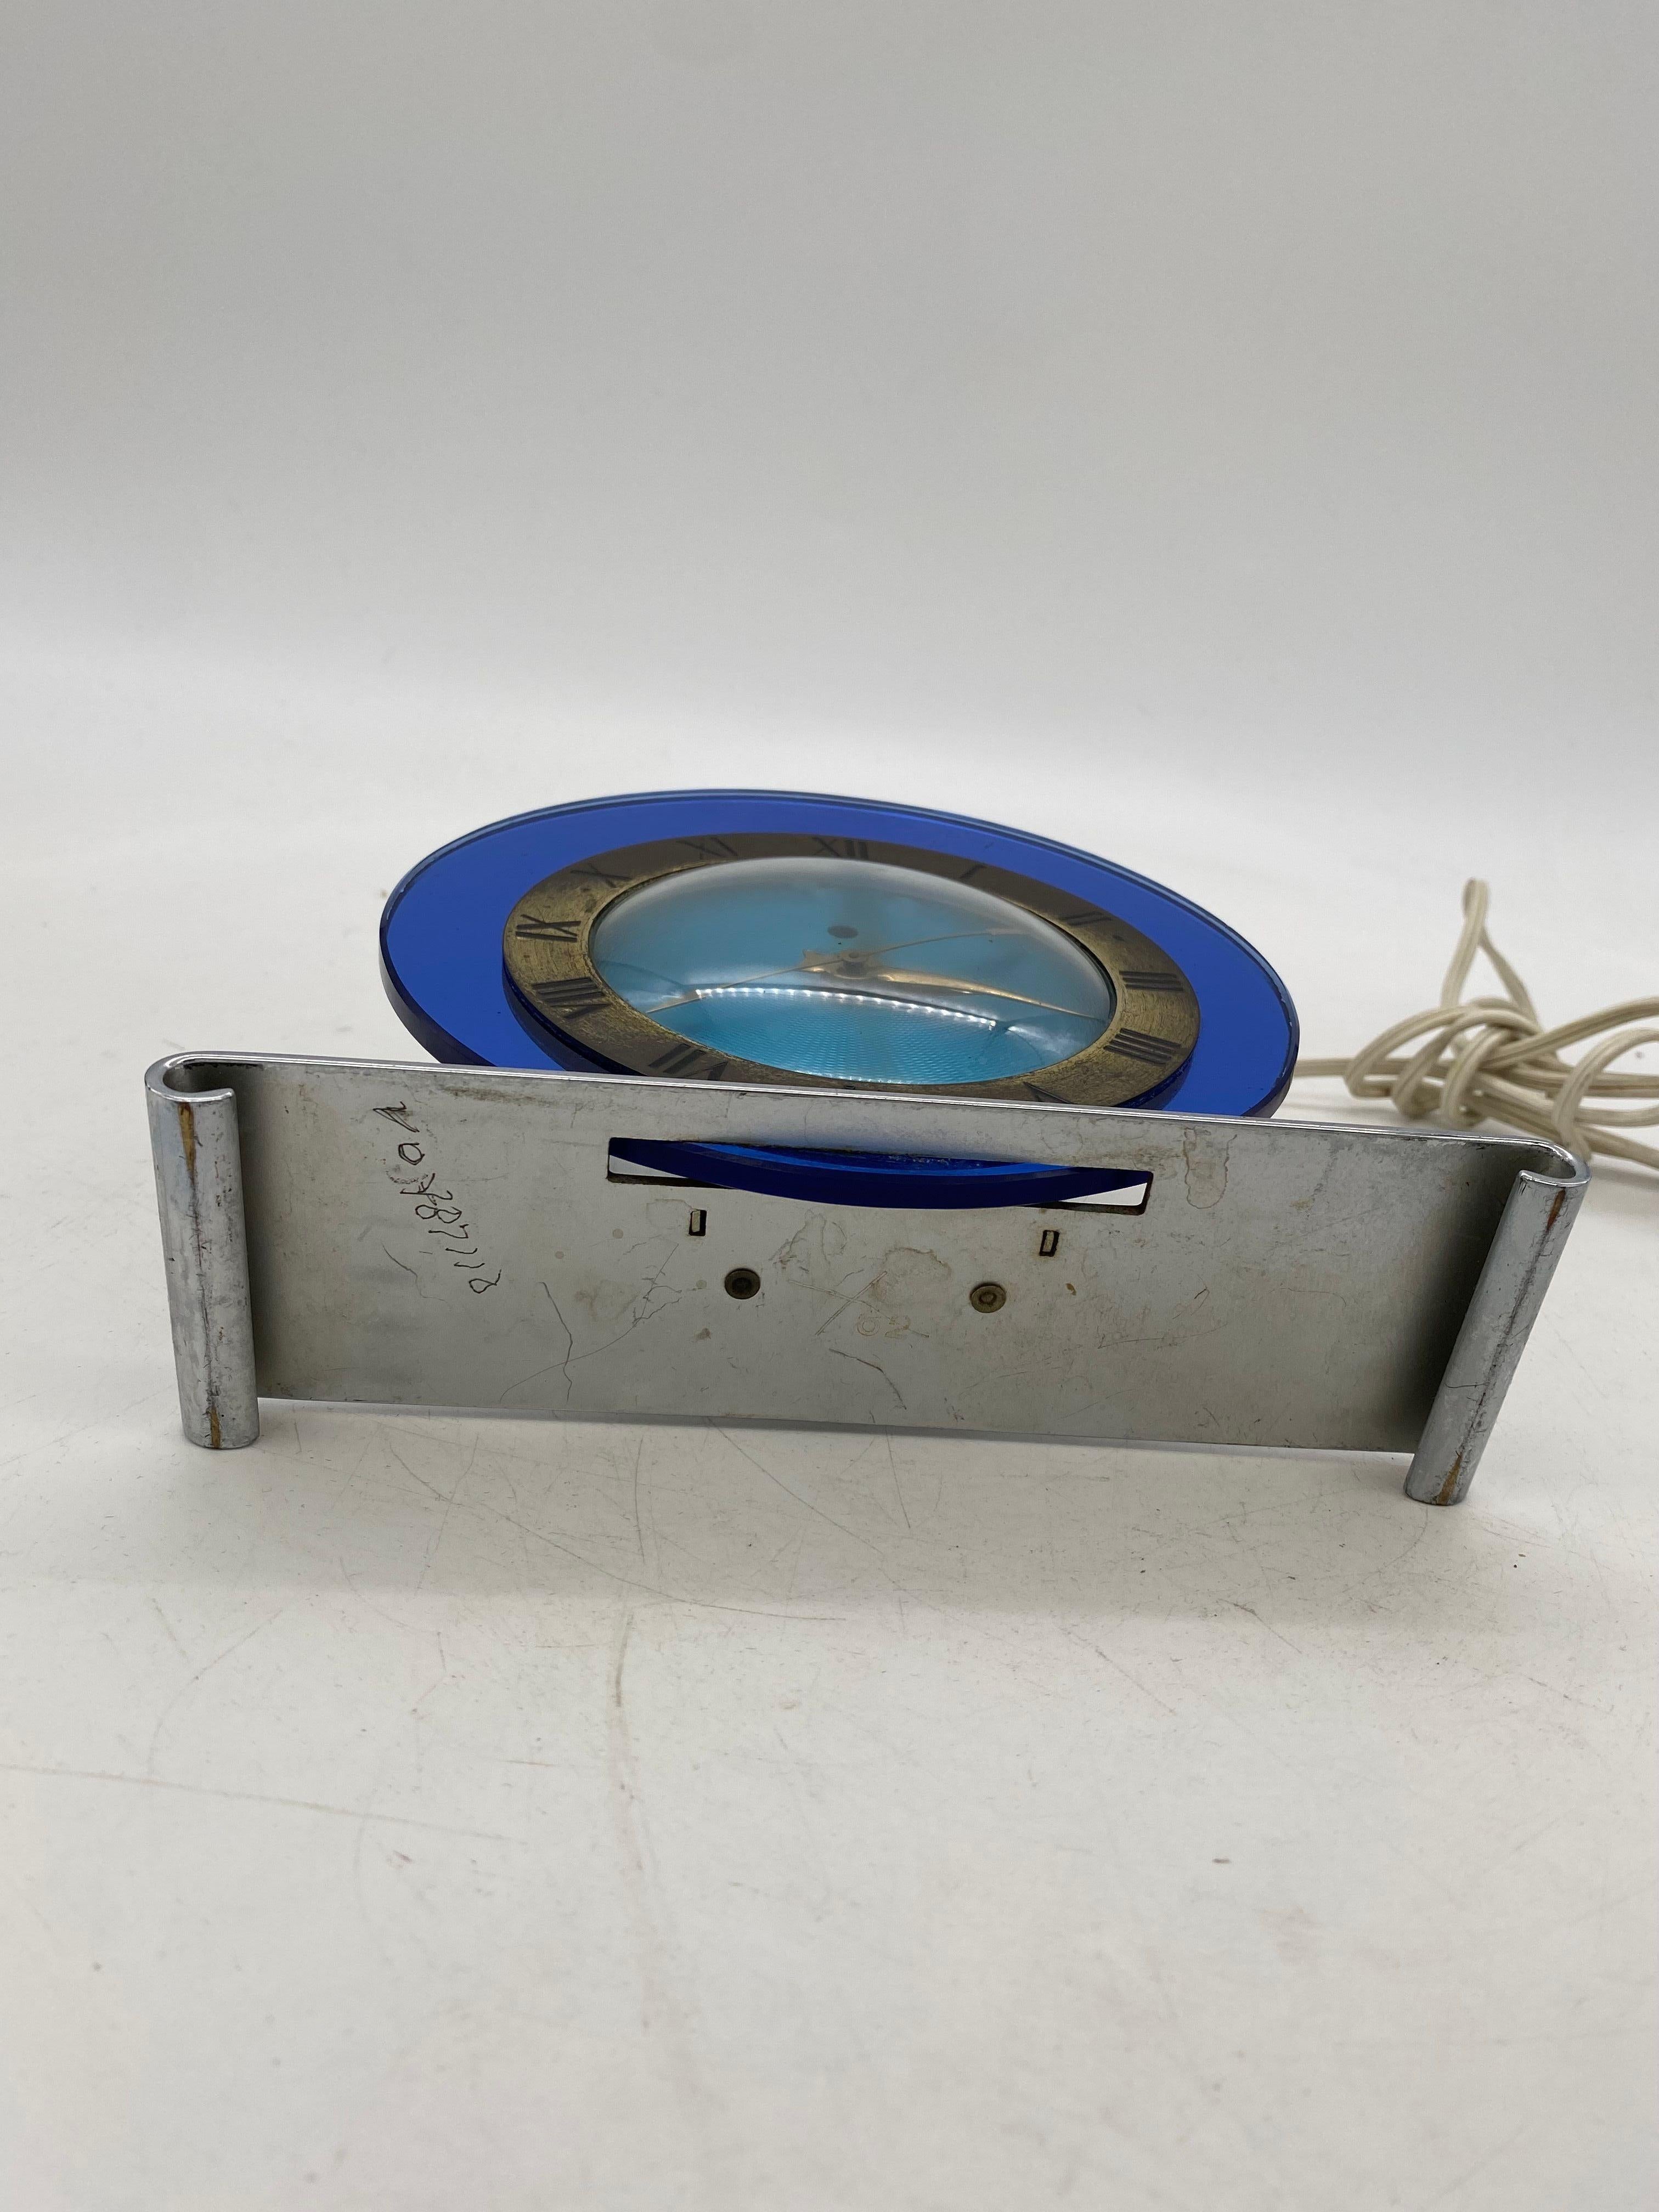 Mid-20th Century 1935 Telechron Art Deco Electric Clock with Blue Glass